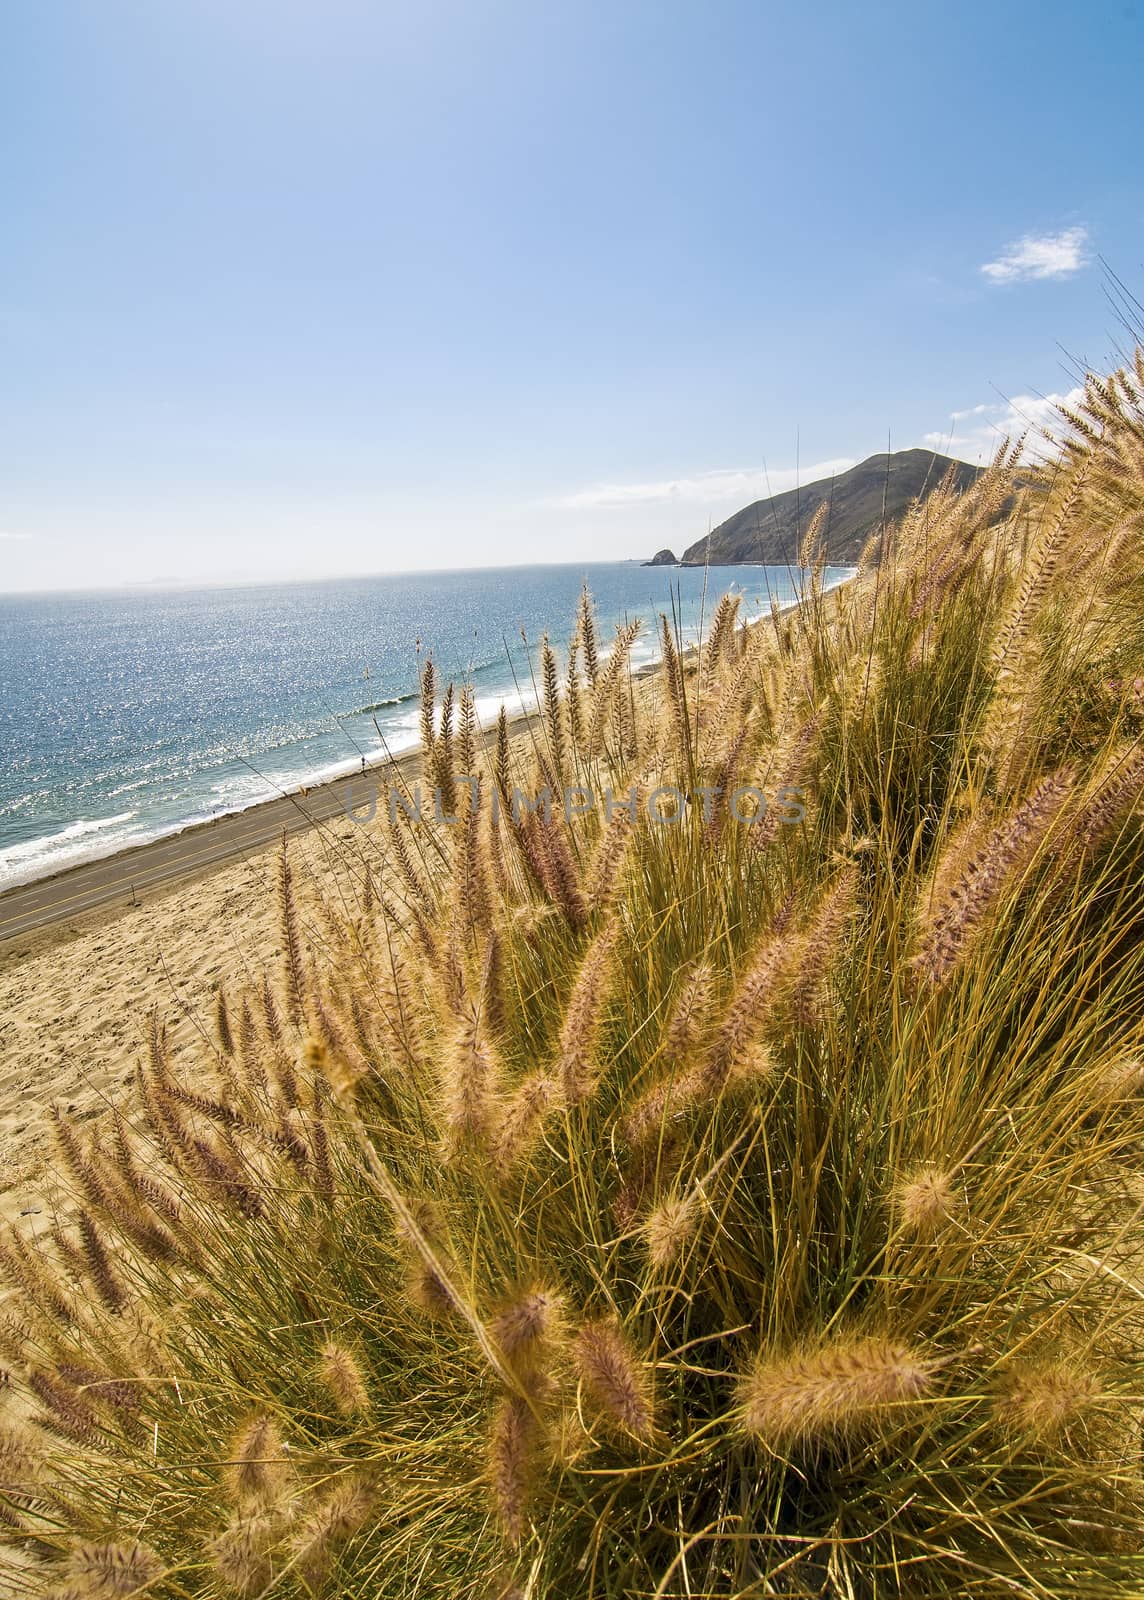 Dune grass with beach in background by Njean